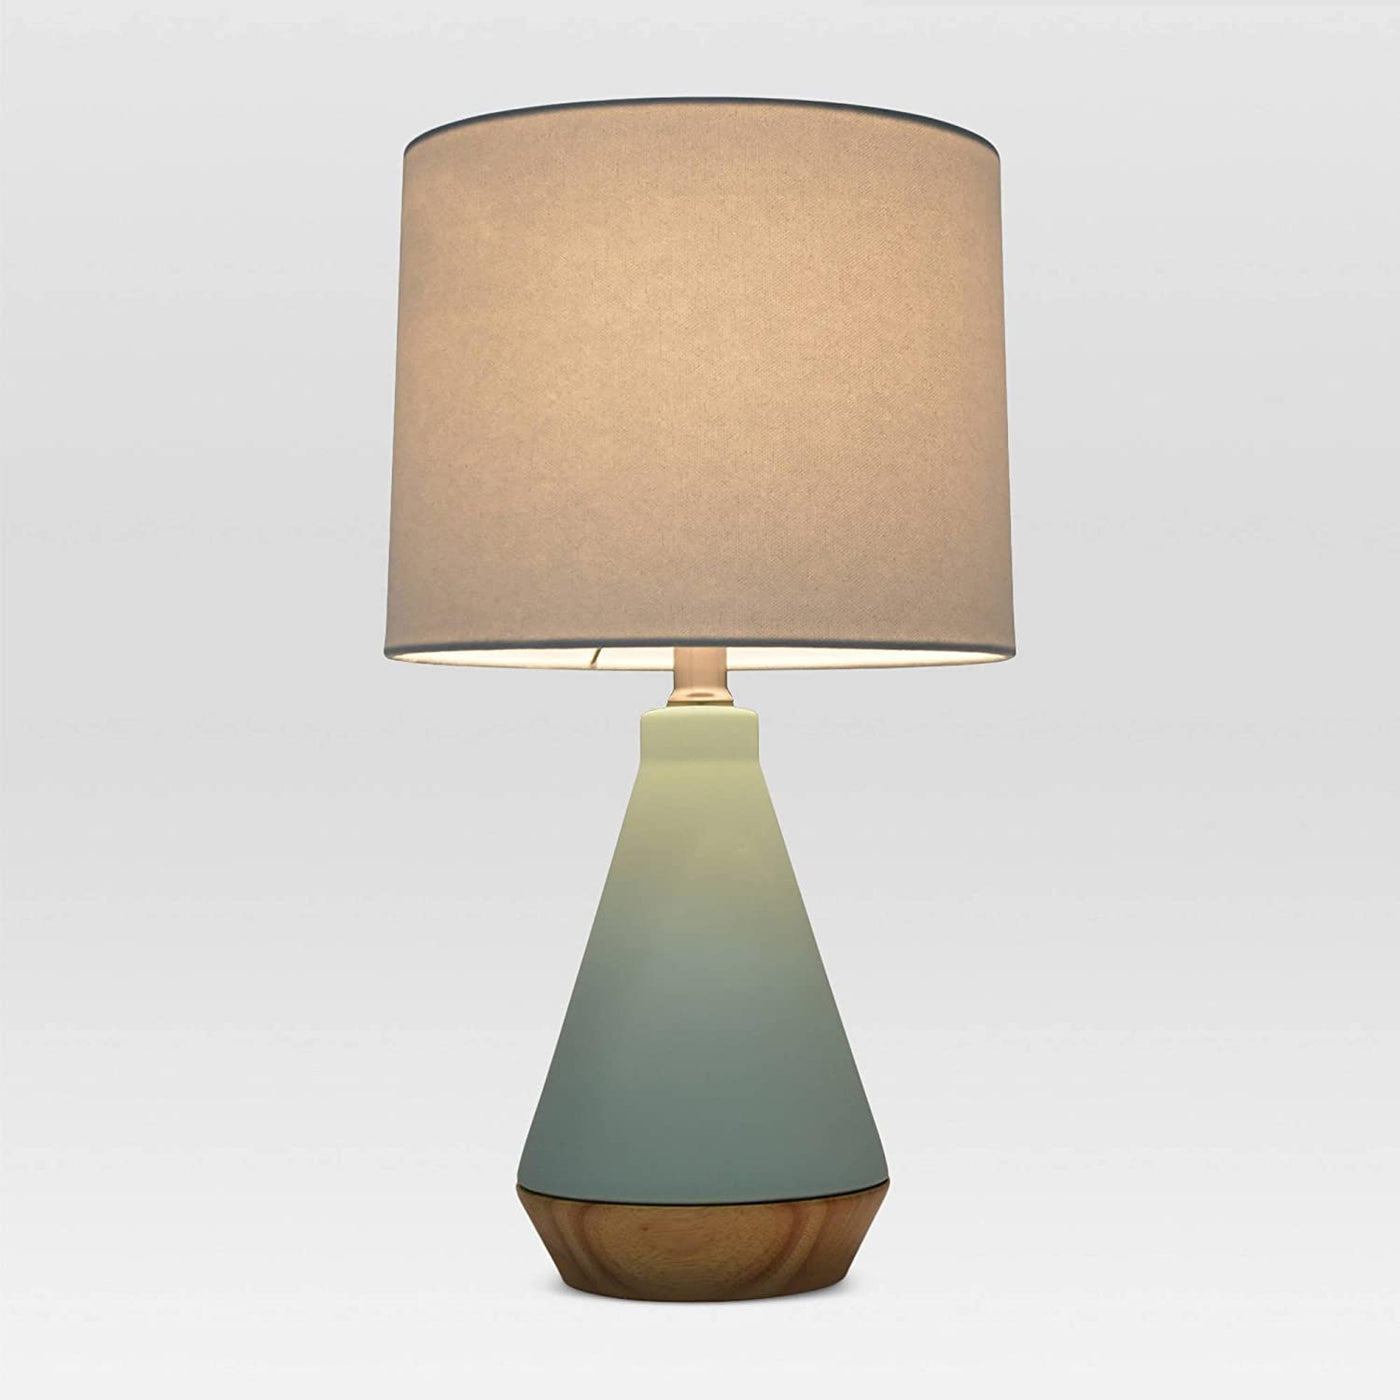 Tapered Ceramic with Wood Detail Table Lamp - Project 62 Aqua